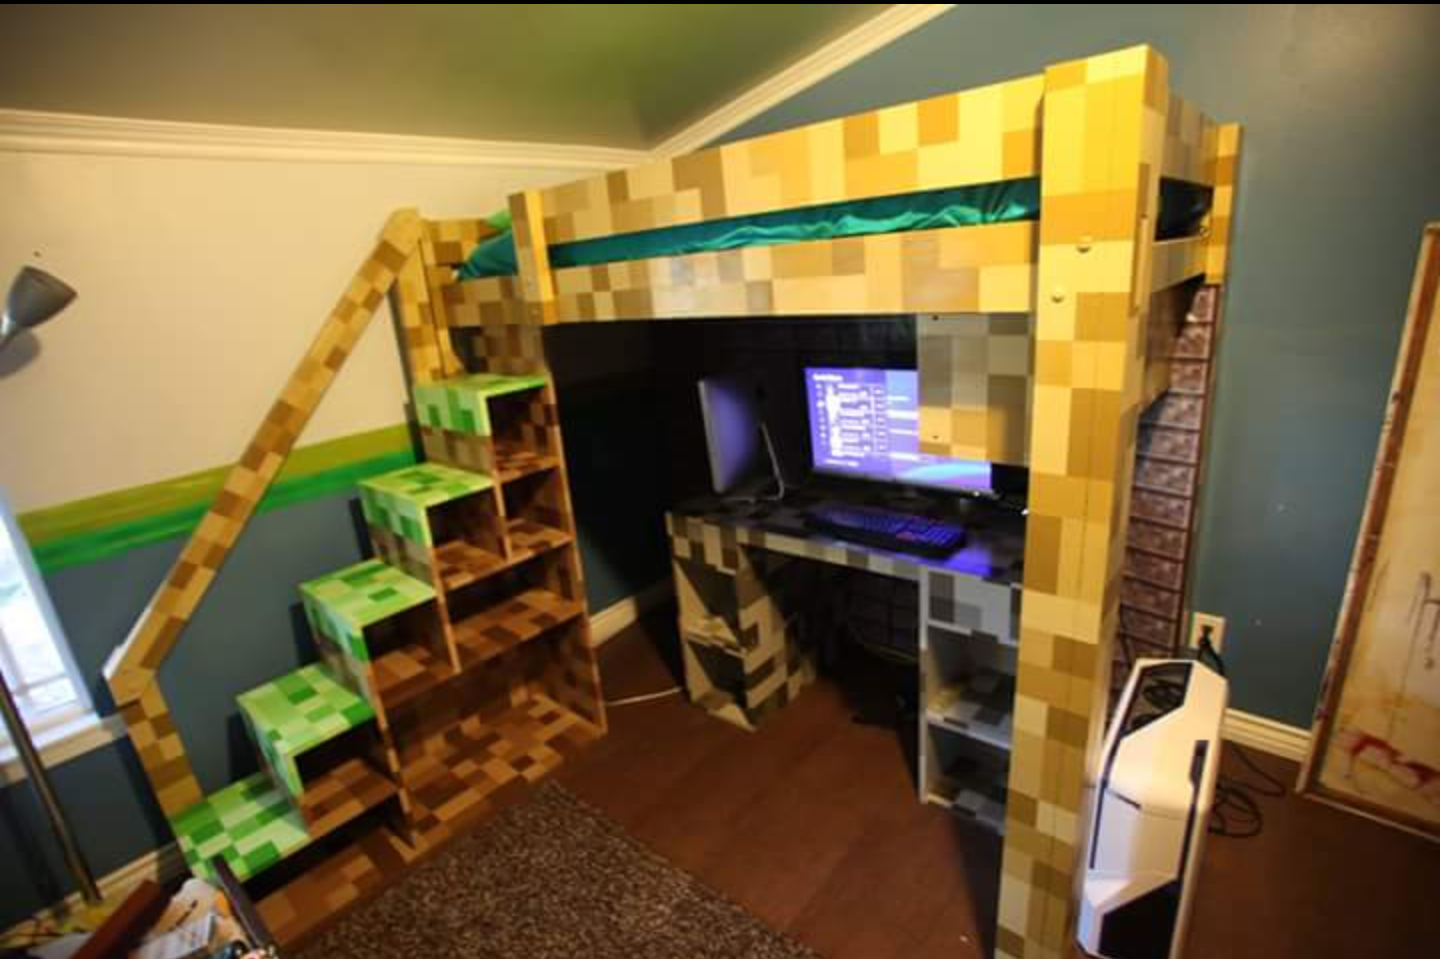 Minecraft Bunk Bed Loft With Desk, How To Make A Bunk Bed With Desk Underneath In Minecraft